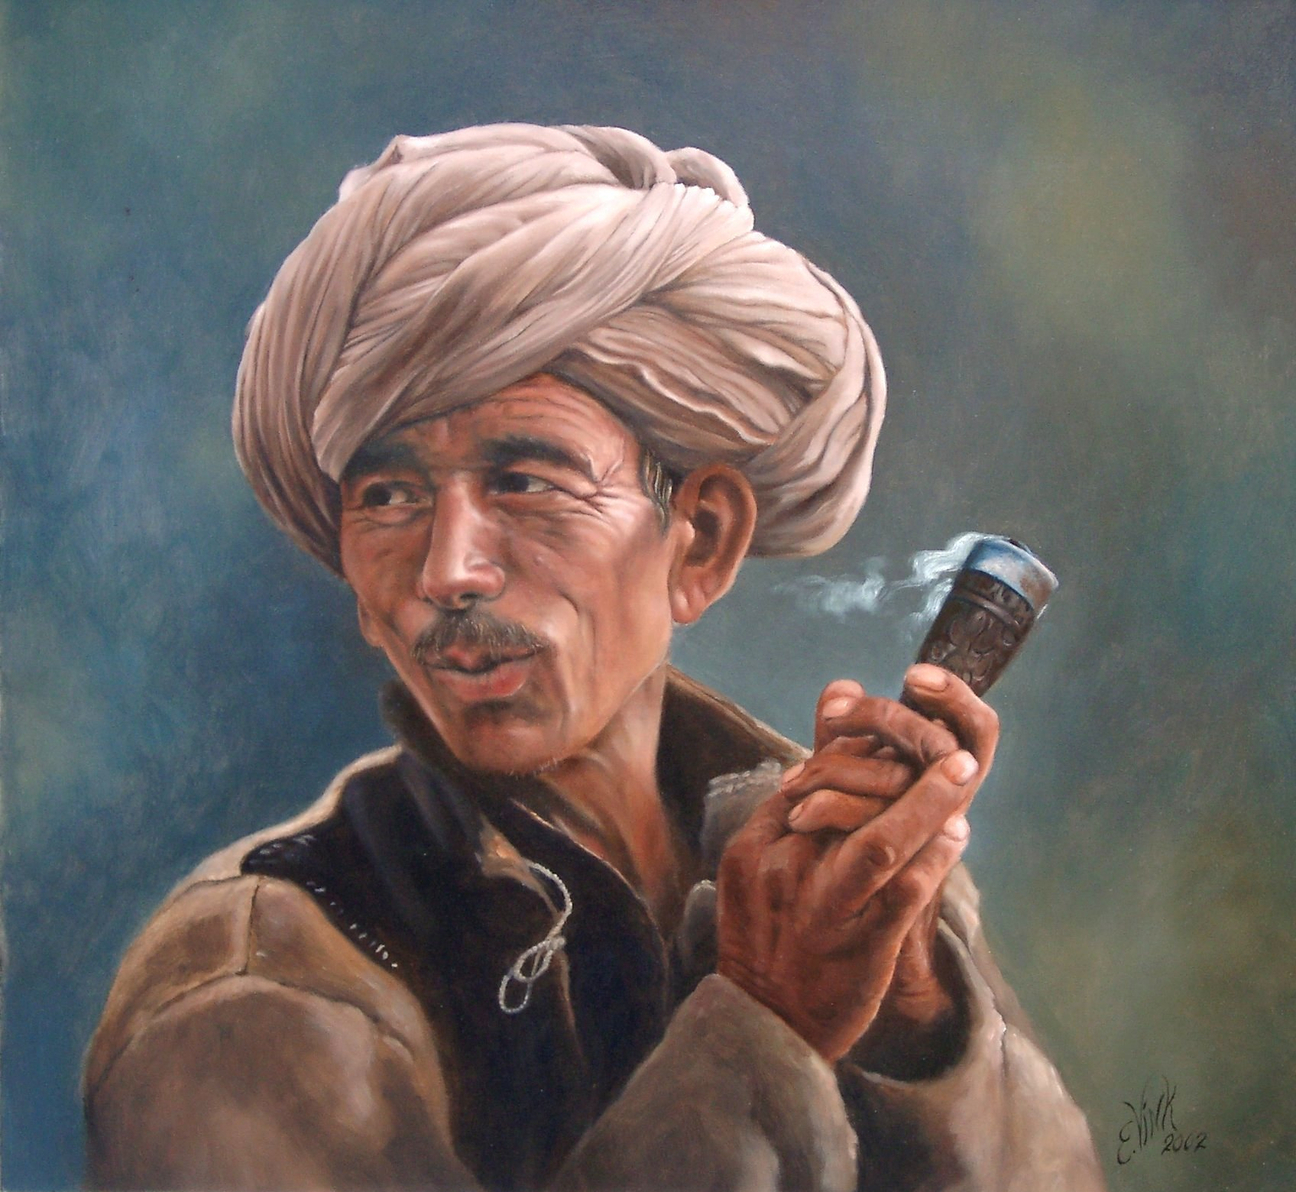 Portrait of a man, a Nomad who is smoking something funny. Made by portrait painter Els Vink.